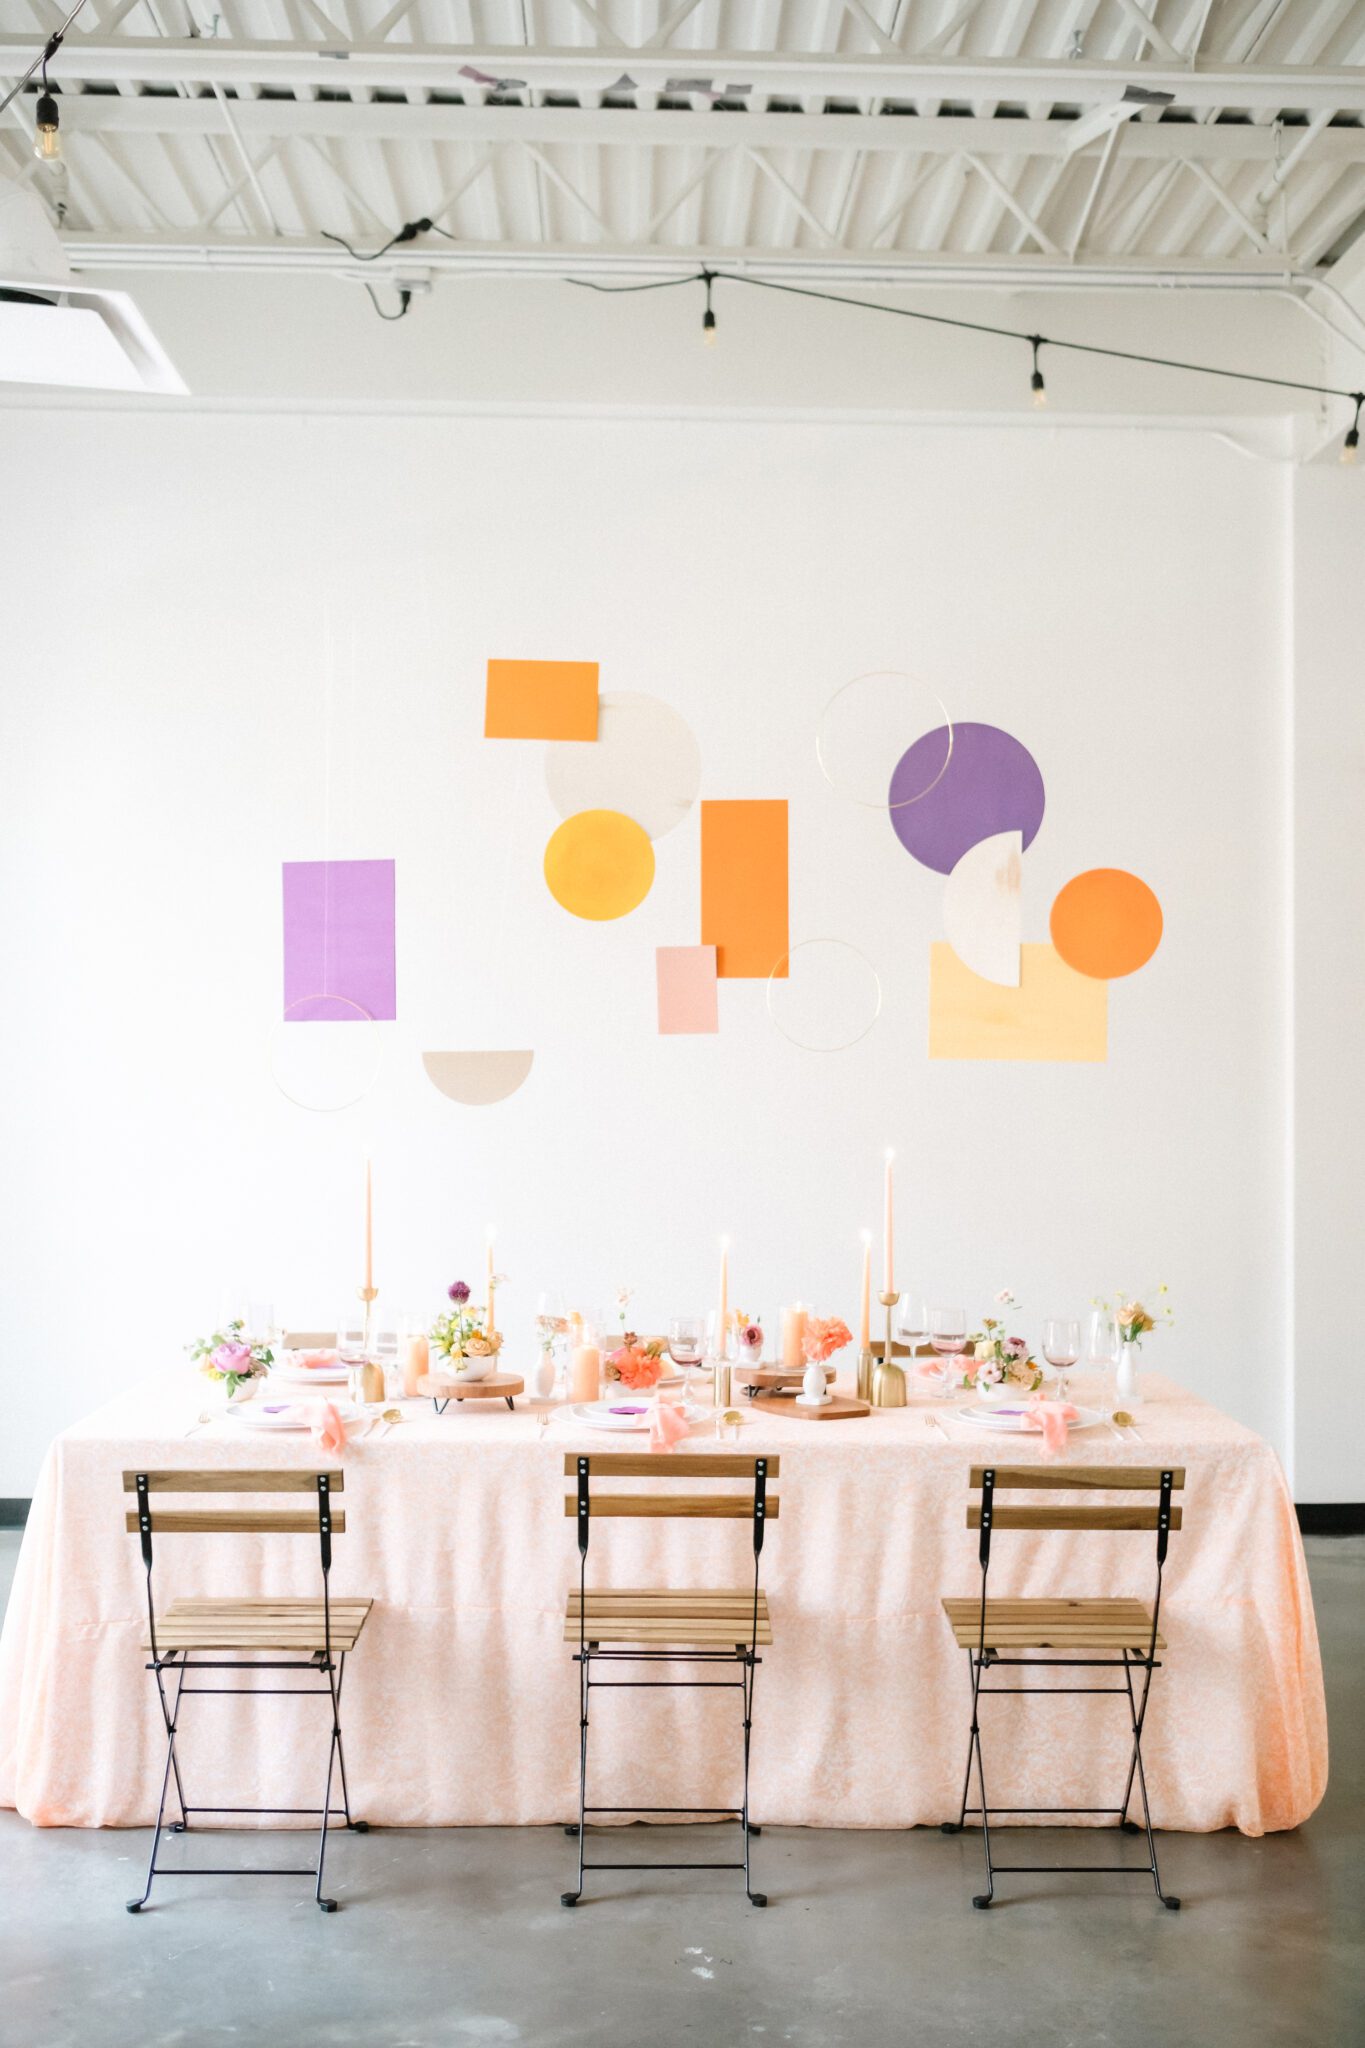 Bright & Colourful Brunch Wedding Inspiration at The Brownstone Calgary, Bronte Bride. Retro inspired vibrant colour palette of purple, orange, yellow, peach, tangerine and coral. Geometric hanging installation over the tables. 